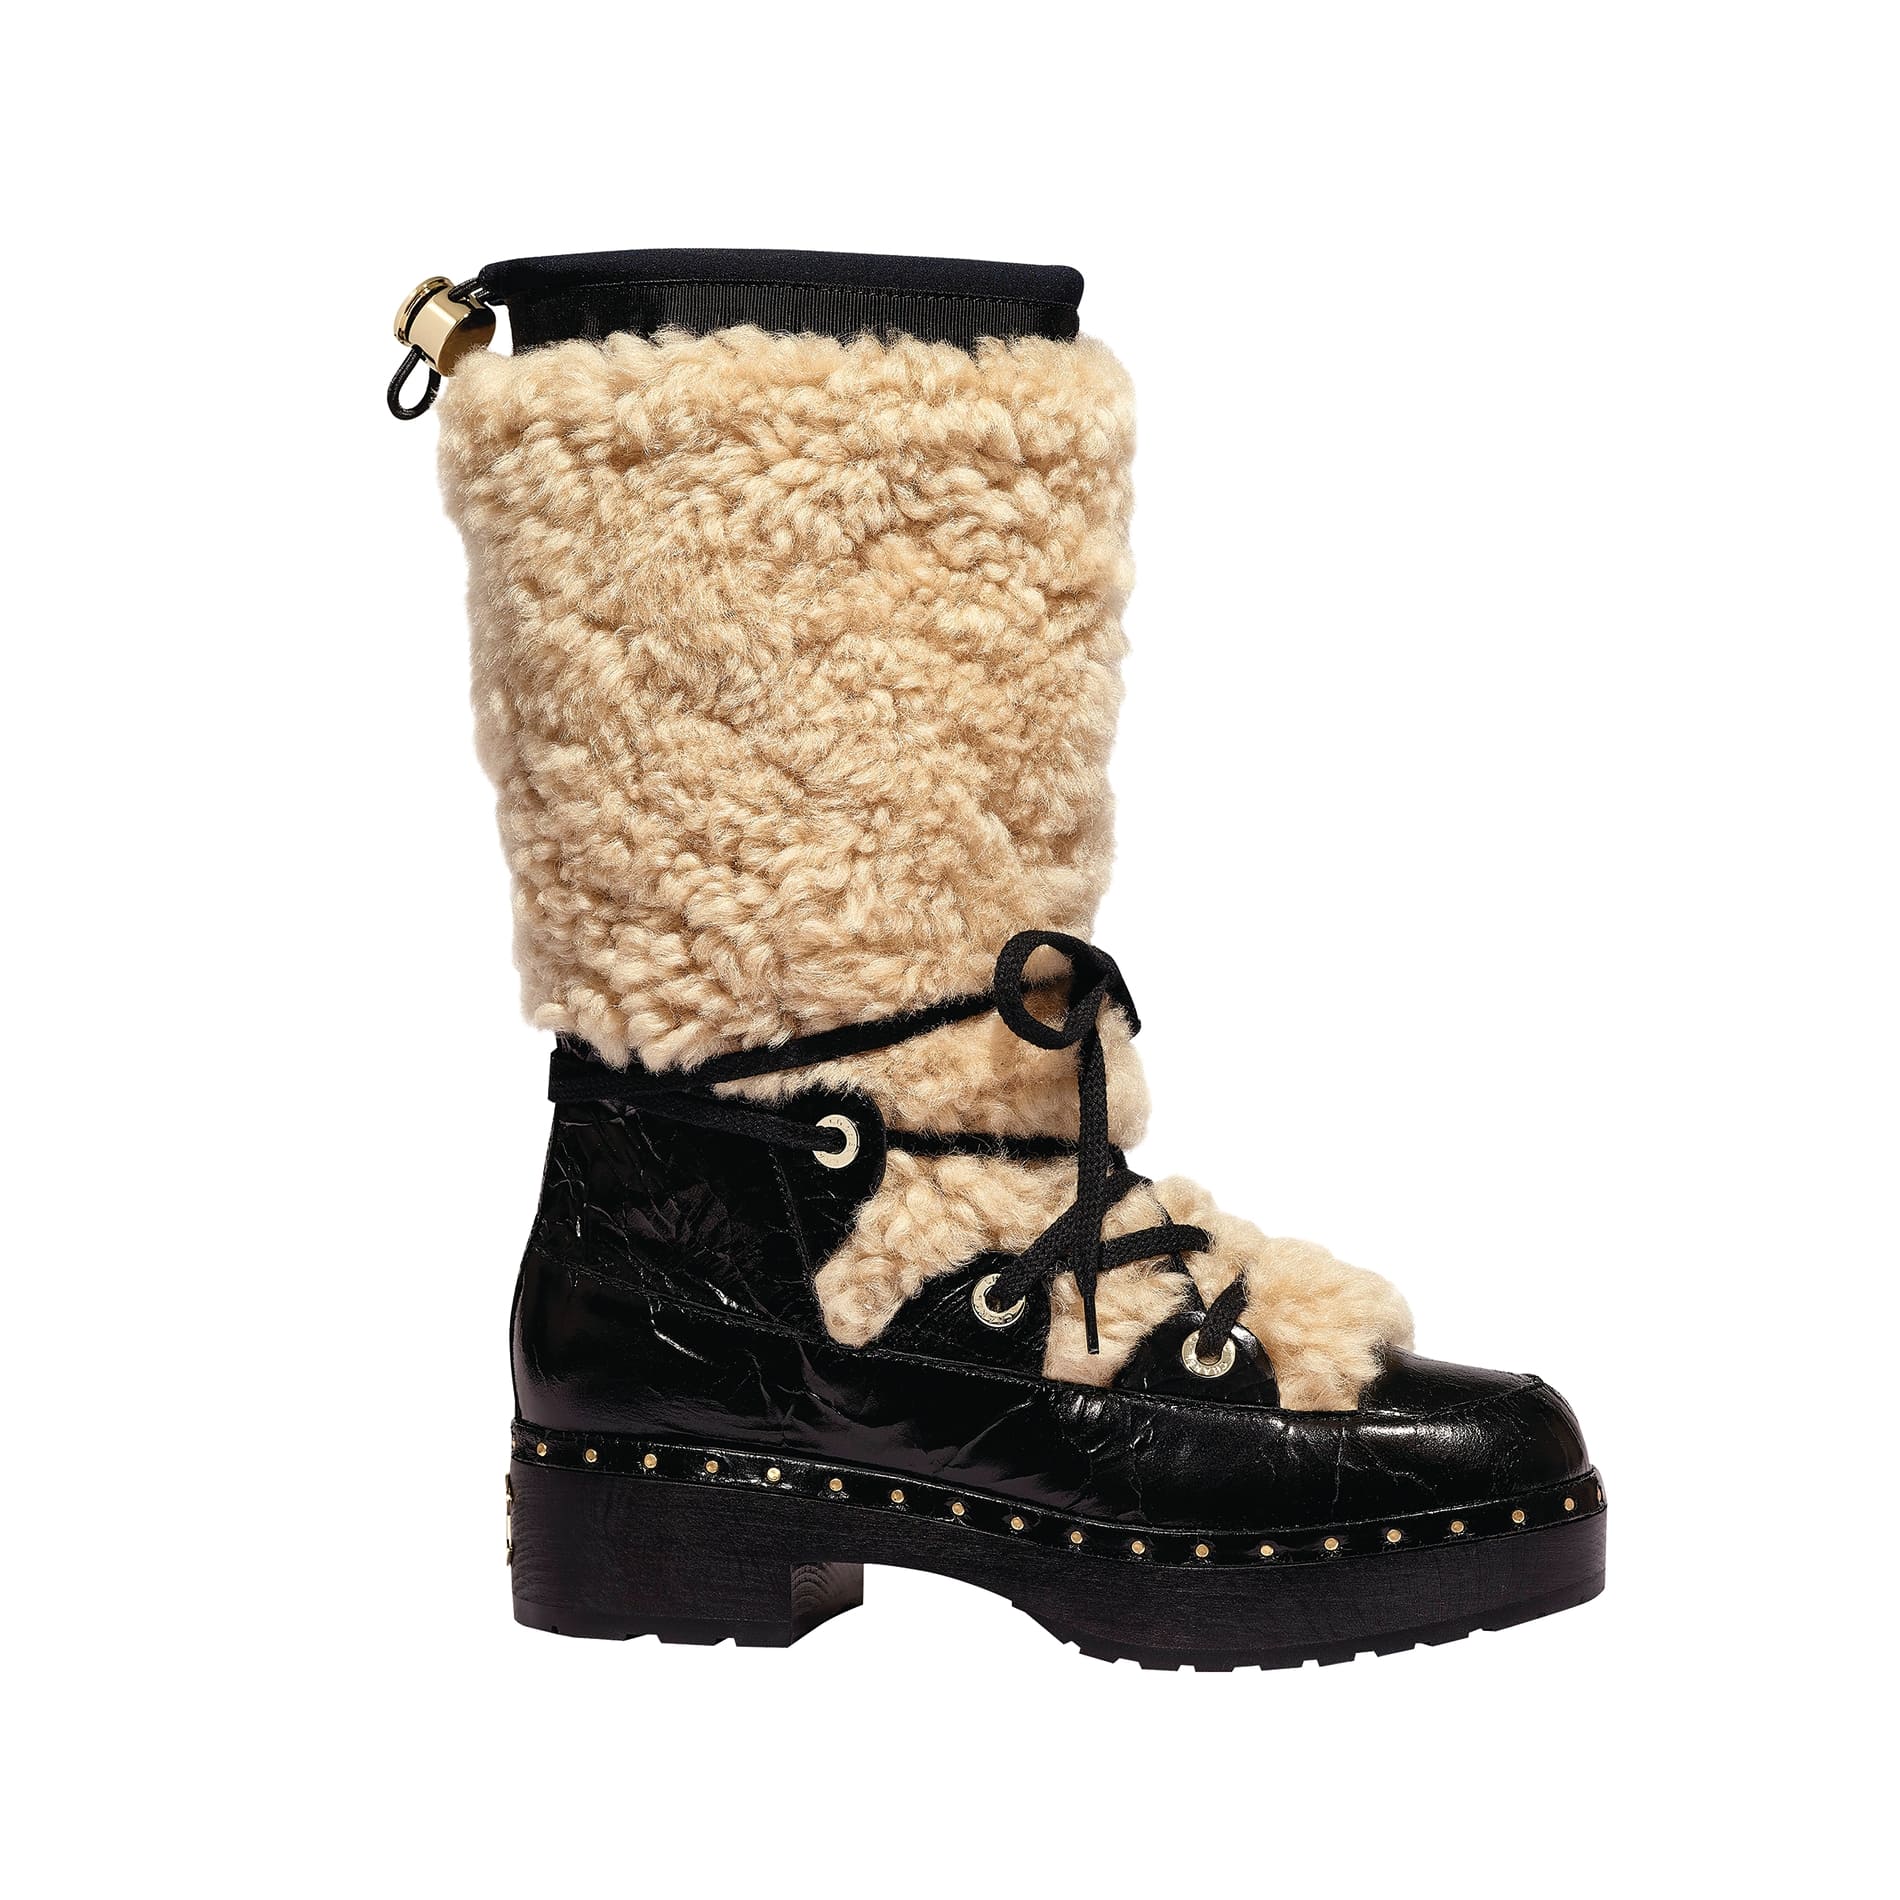 Chanel_Beige_and_black_high_boots_in_shearling_and_crackled_leather_2UTQ9.jpg